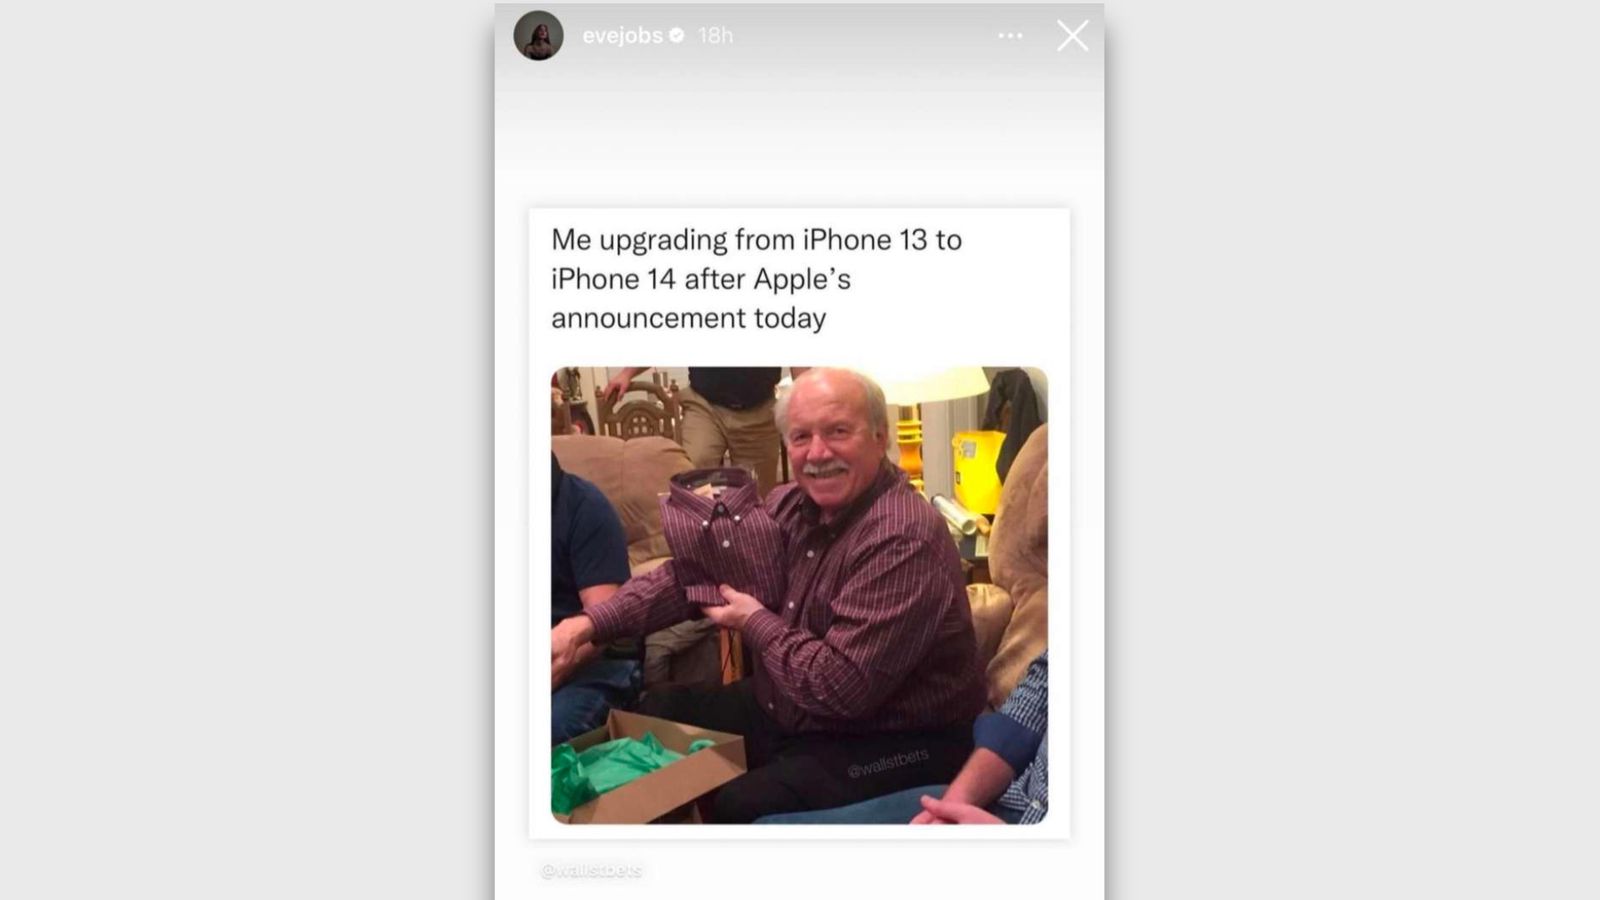 People Are Making Fun Of The New iPhone 12 In 30 Hilarious Memes